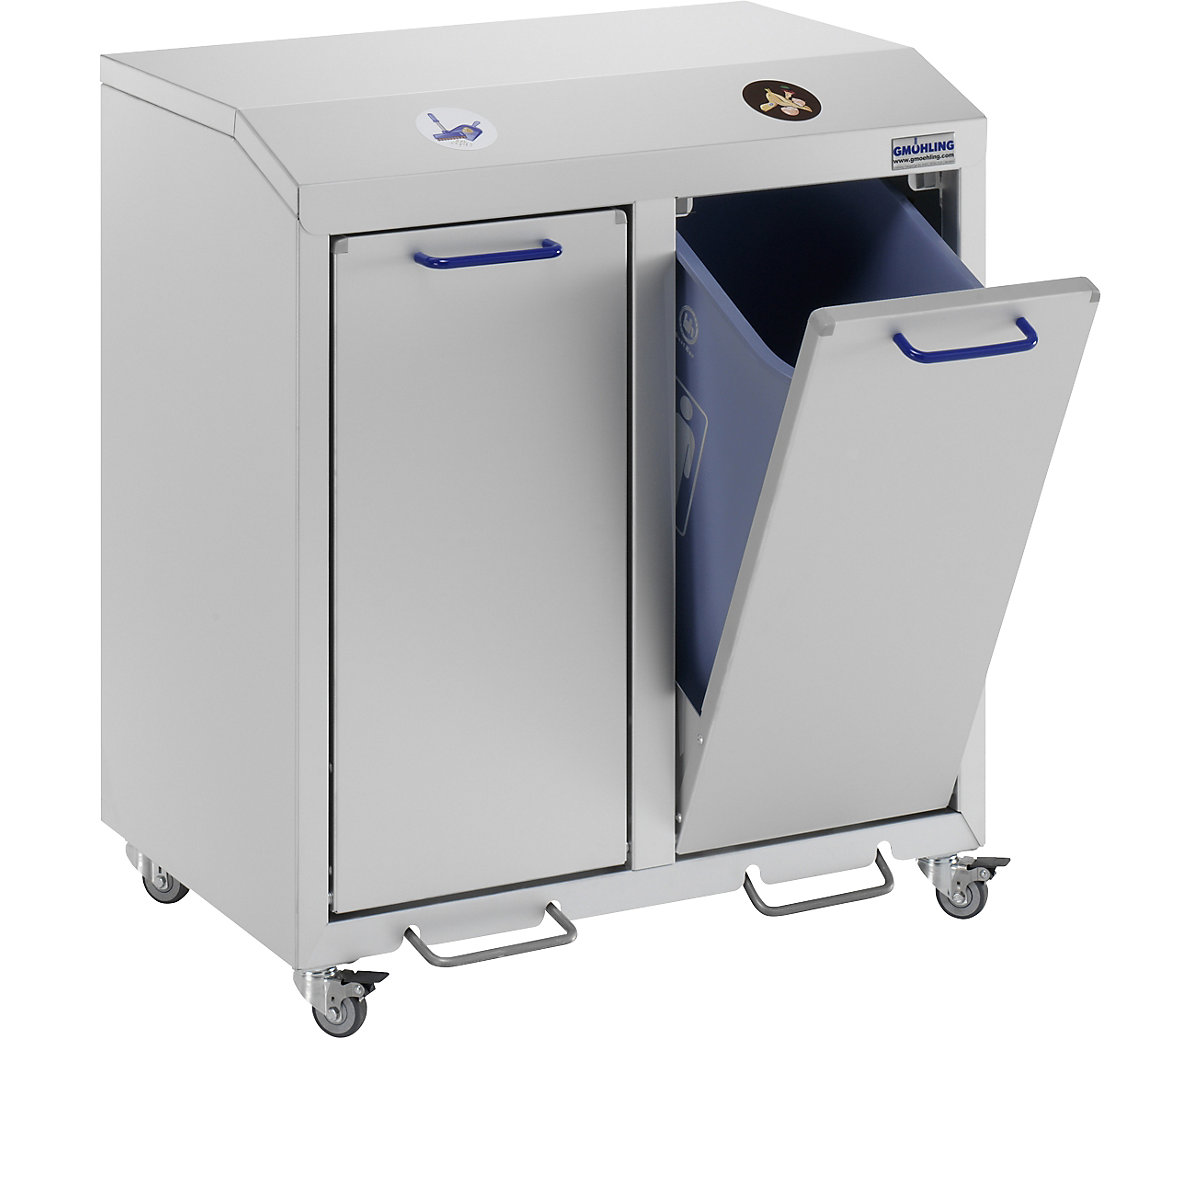 G®-COLLECT aluminium recyclable waste collector - Gmöhling